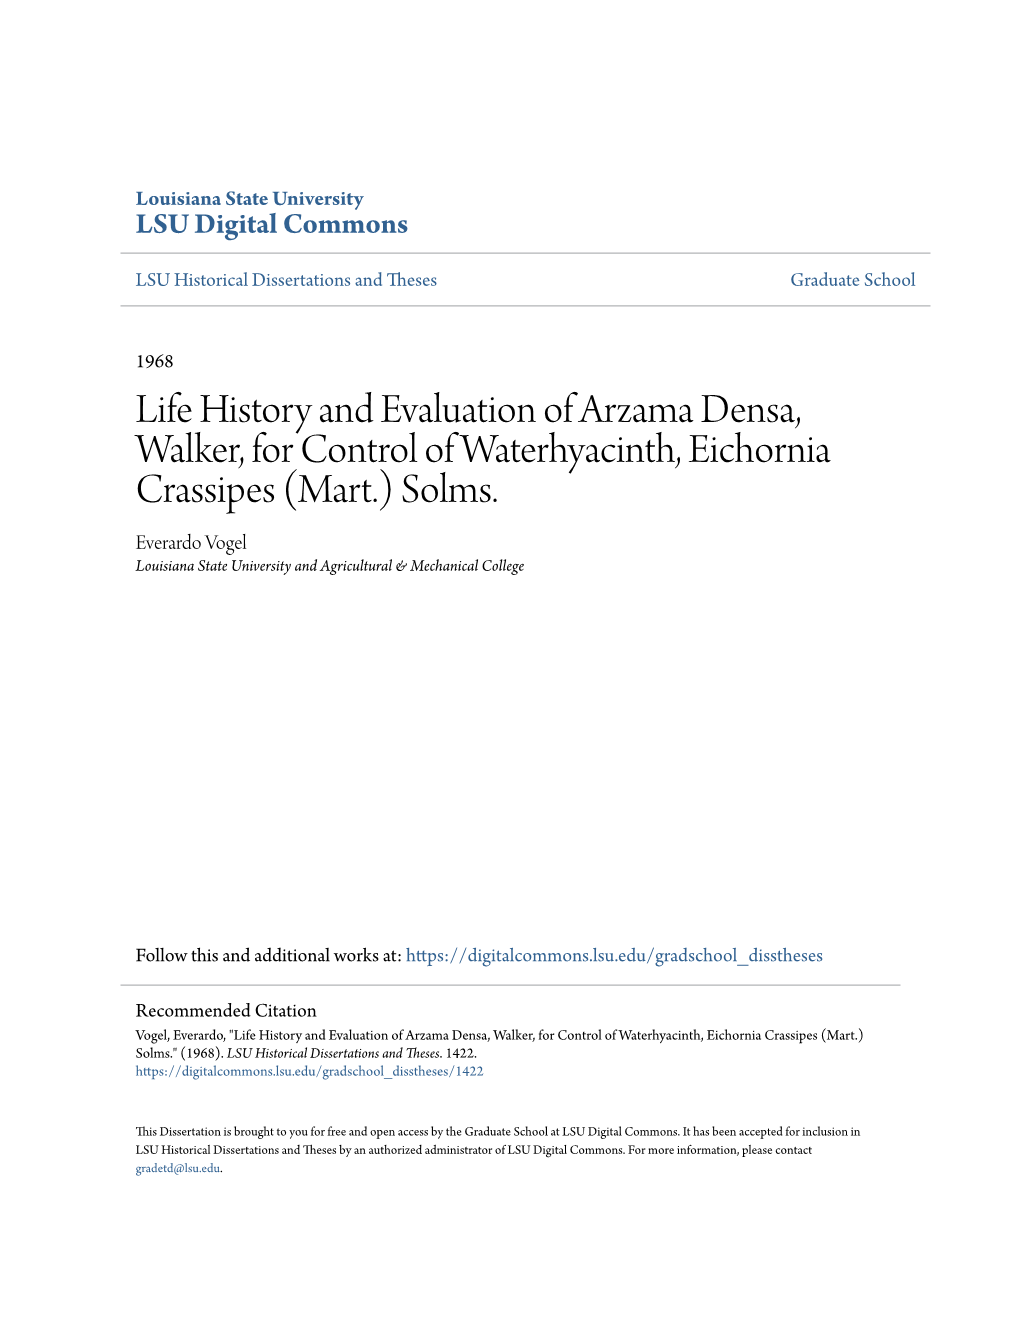 Life History and Evaluation of Arzama Densa, Walker, for Control of Waterhyacinth, Eichornia Crassipes (Mart.) Solms